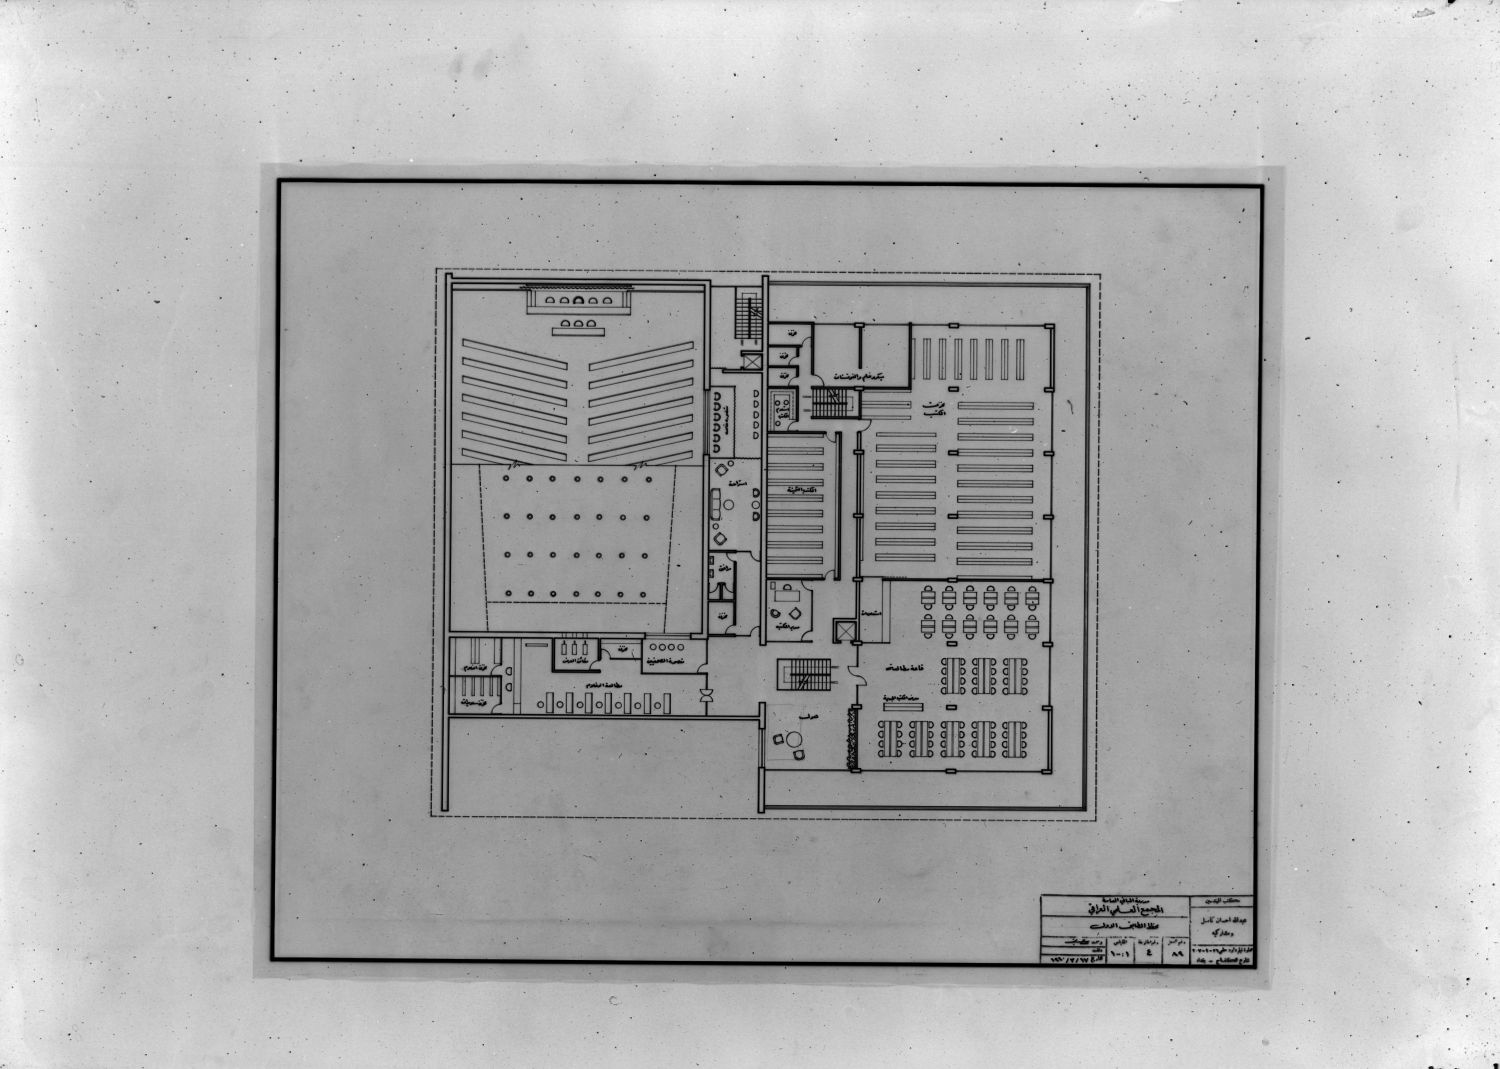 Iraqi Scientific Academy Building - First floor plan (early version not adopted in final construction).